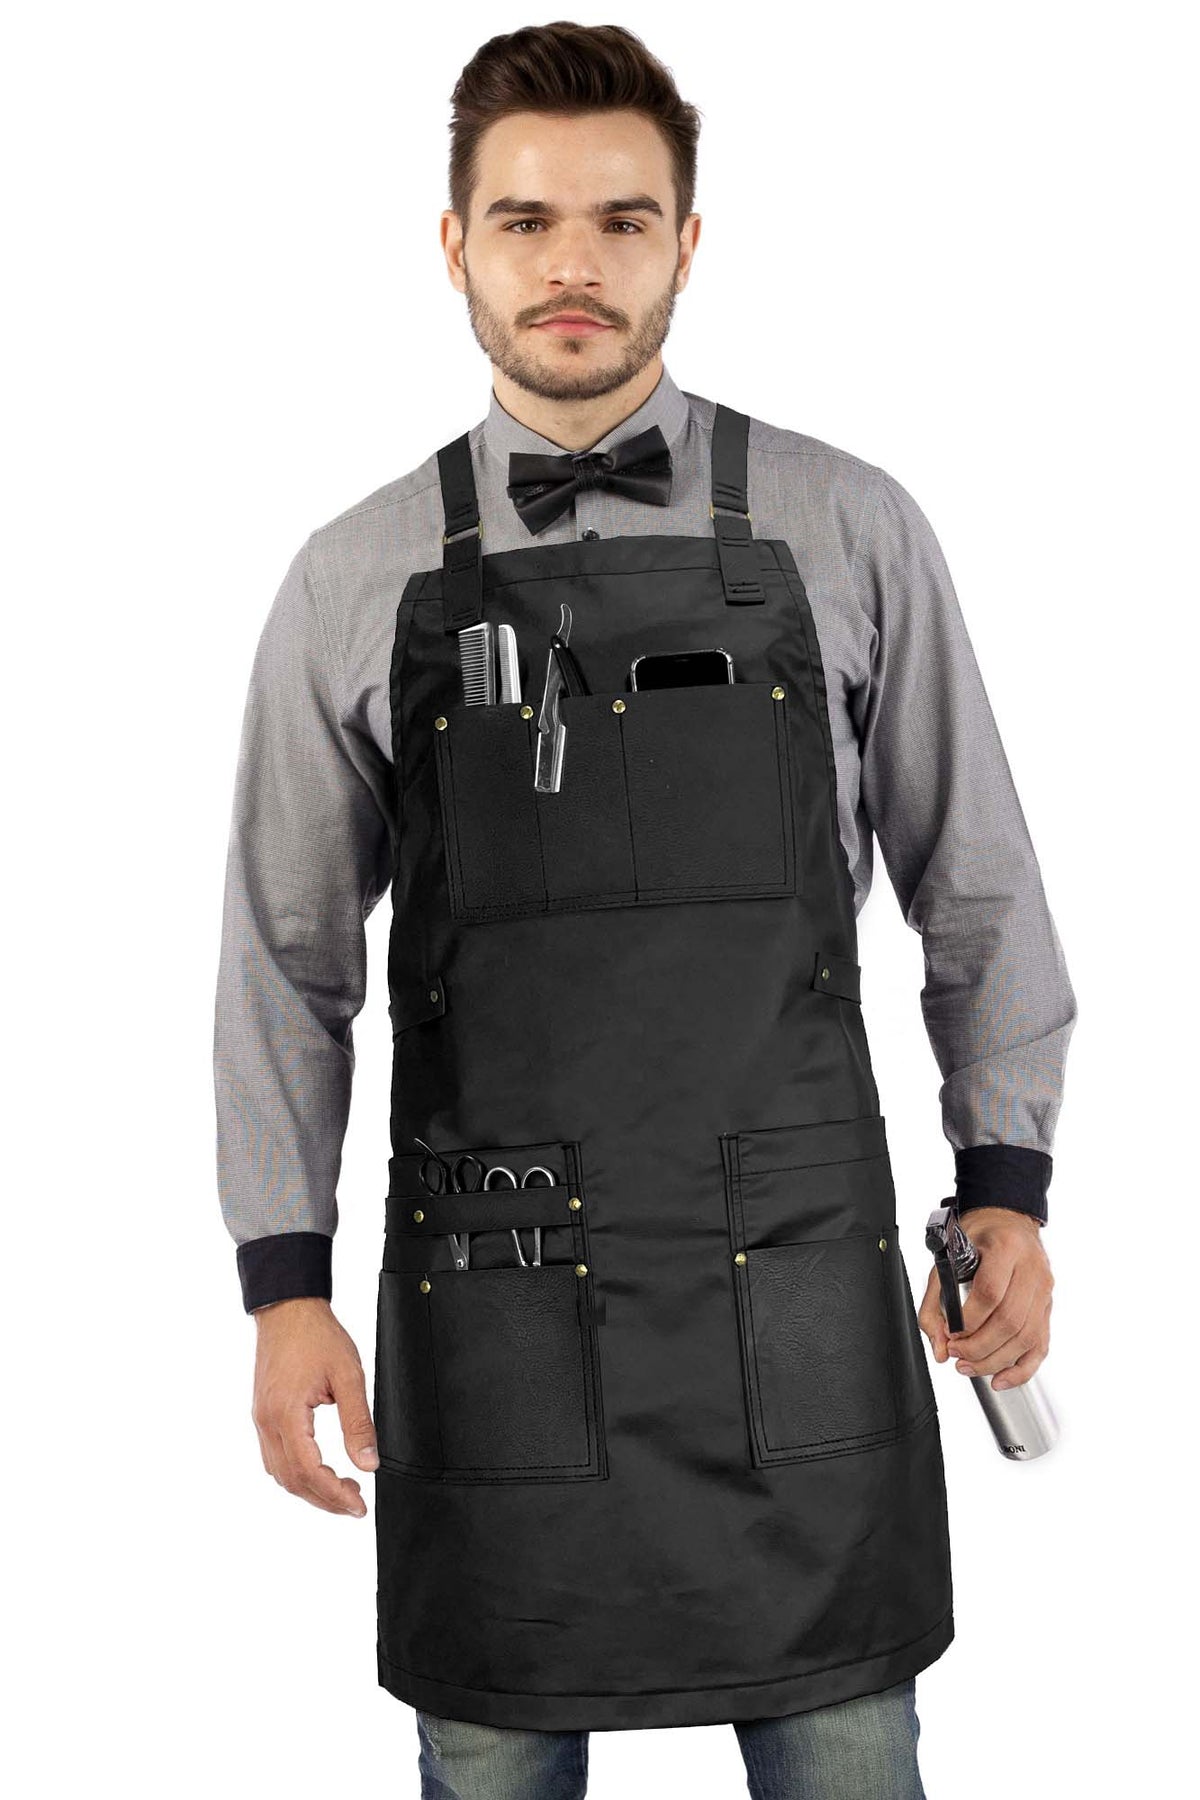 Barber Apron - Leather Straps, Pockets, Loops &amp; Reinforcements - Crossback - Water Resistant - Under NY Sky